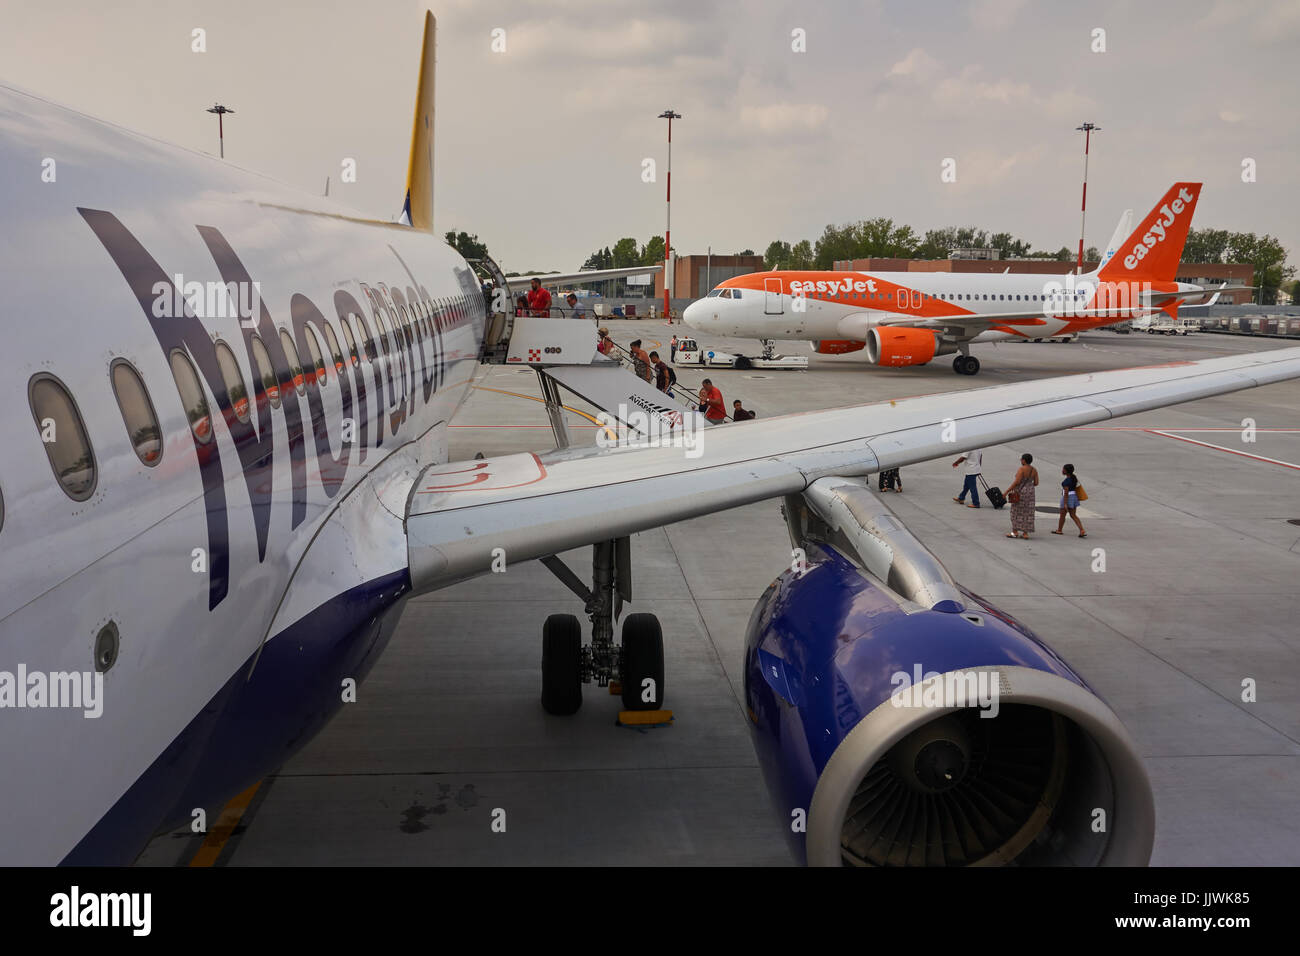 Jet airliner on tarmac at Venice airport. Italy Stock Photo